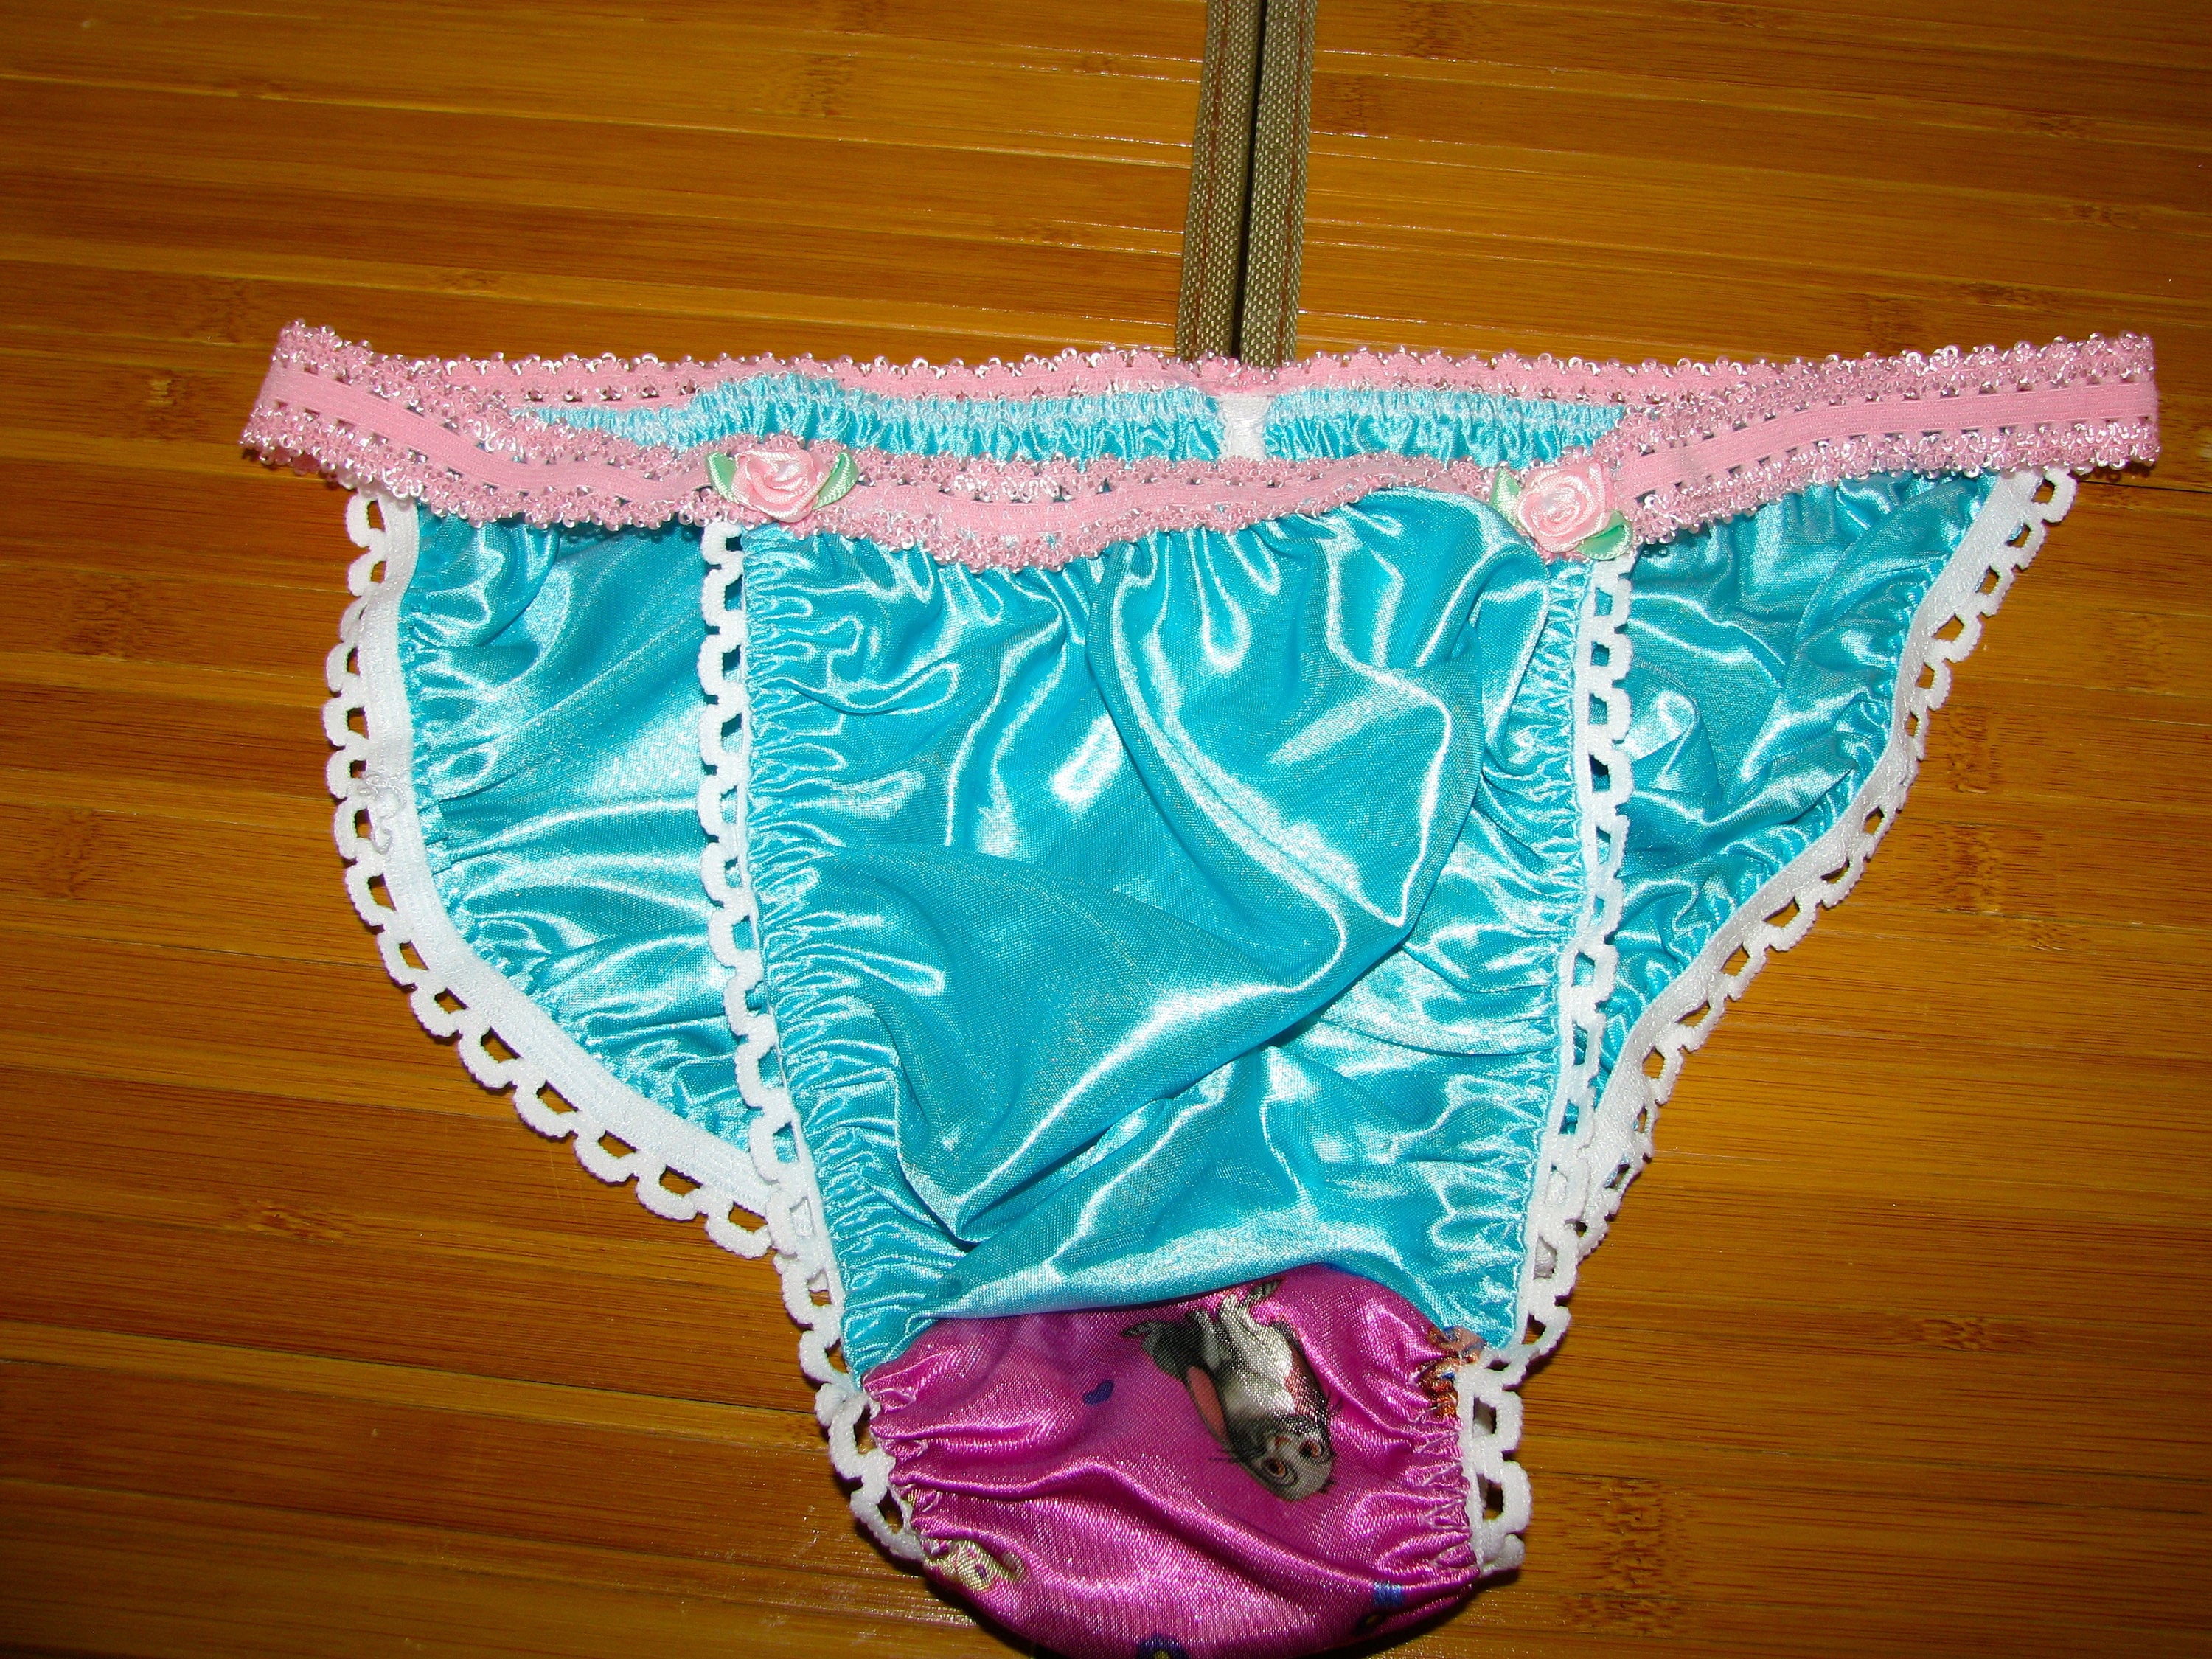 Satin Panties For Men Super Shiny Satin Gusset With Roomy Etsy